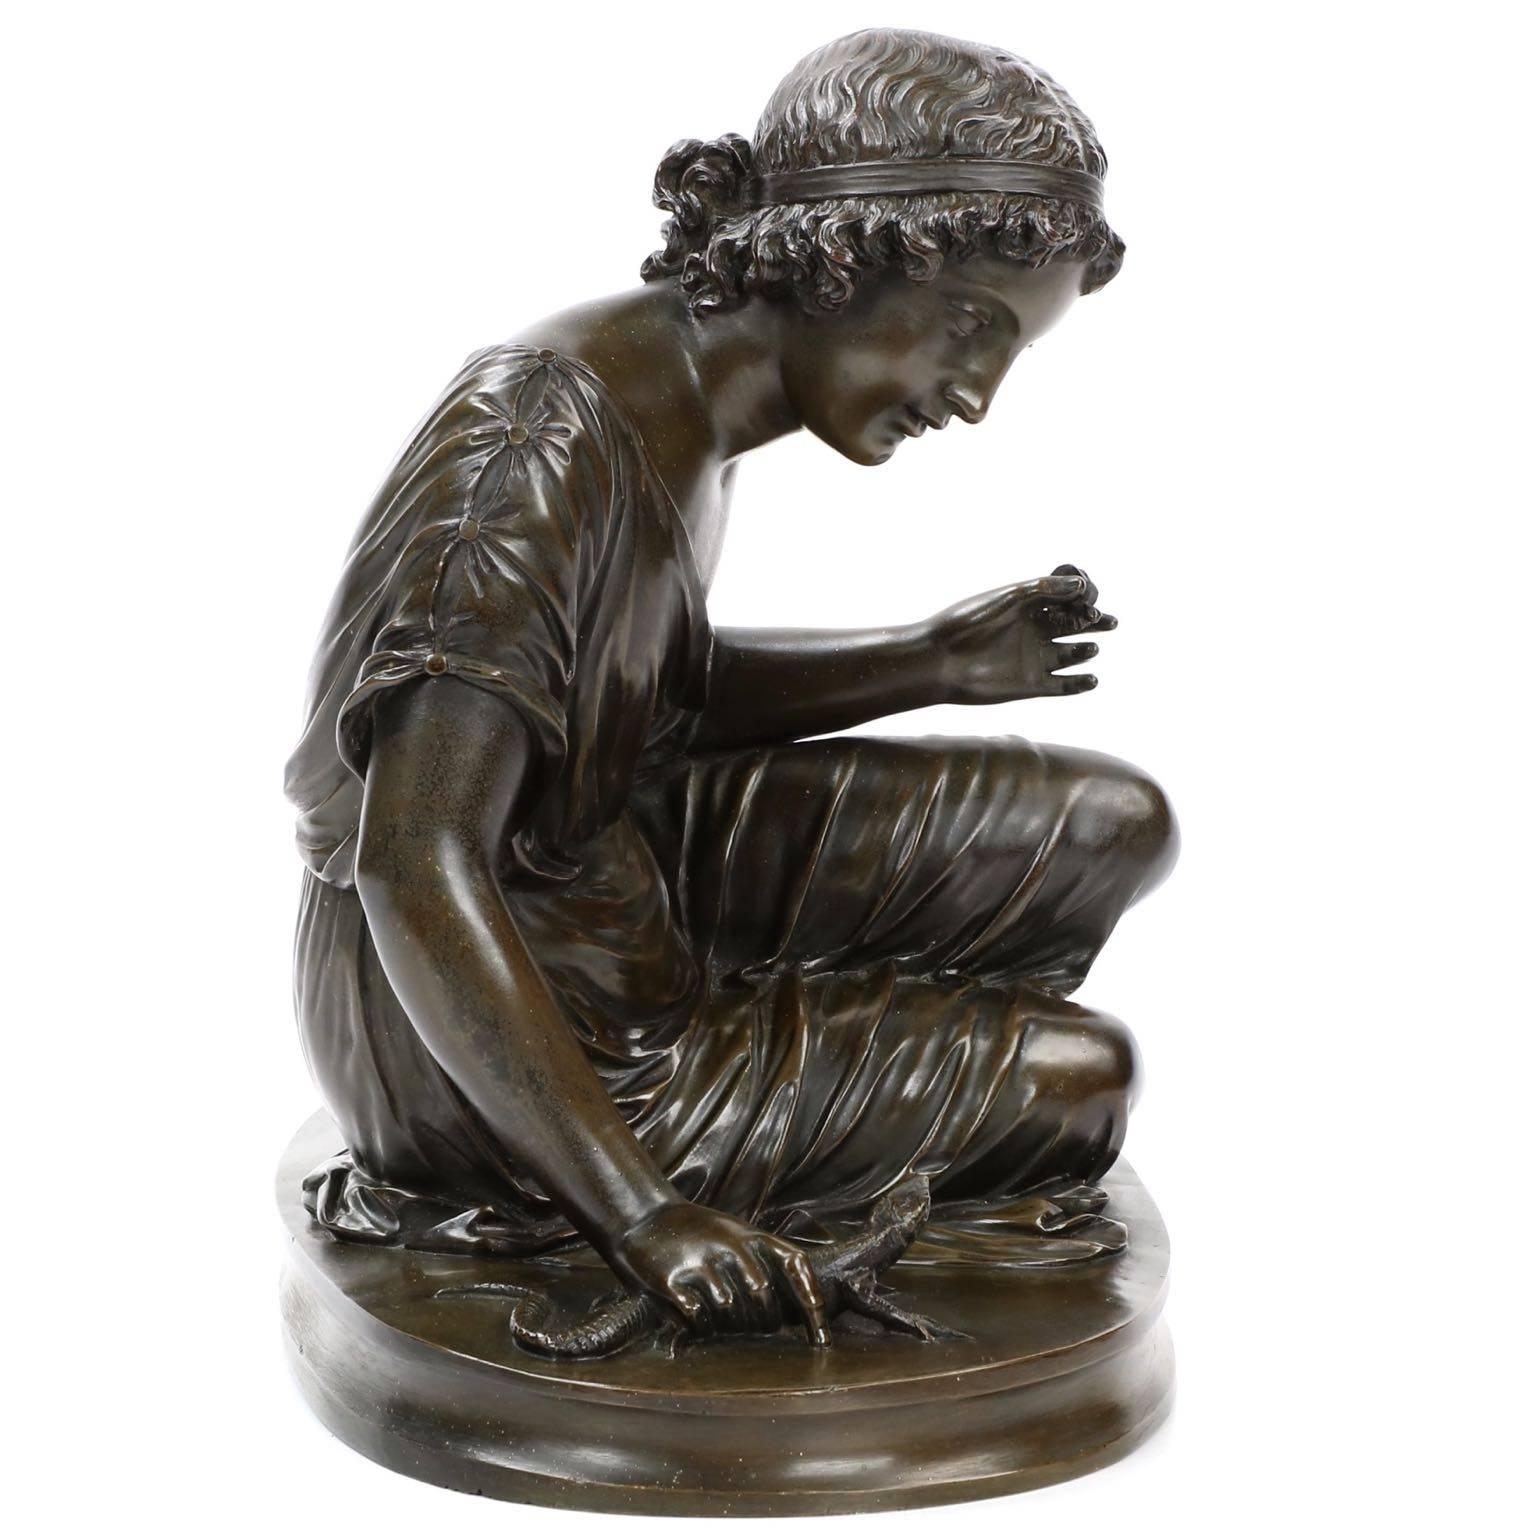 European French Classical Antique Bronze Sculpture of Girl with Lizard, 19th Century